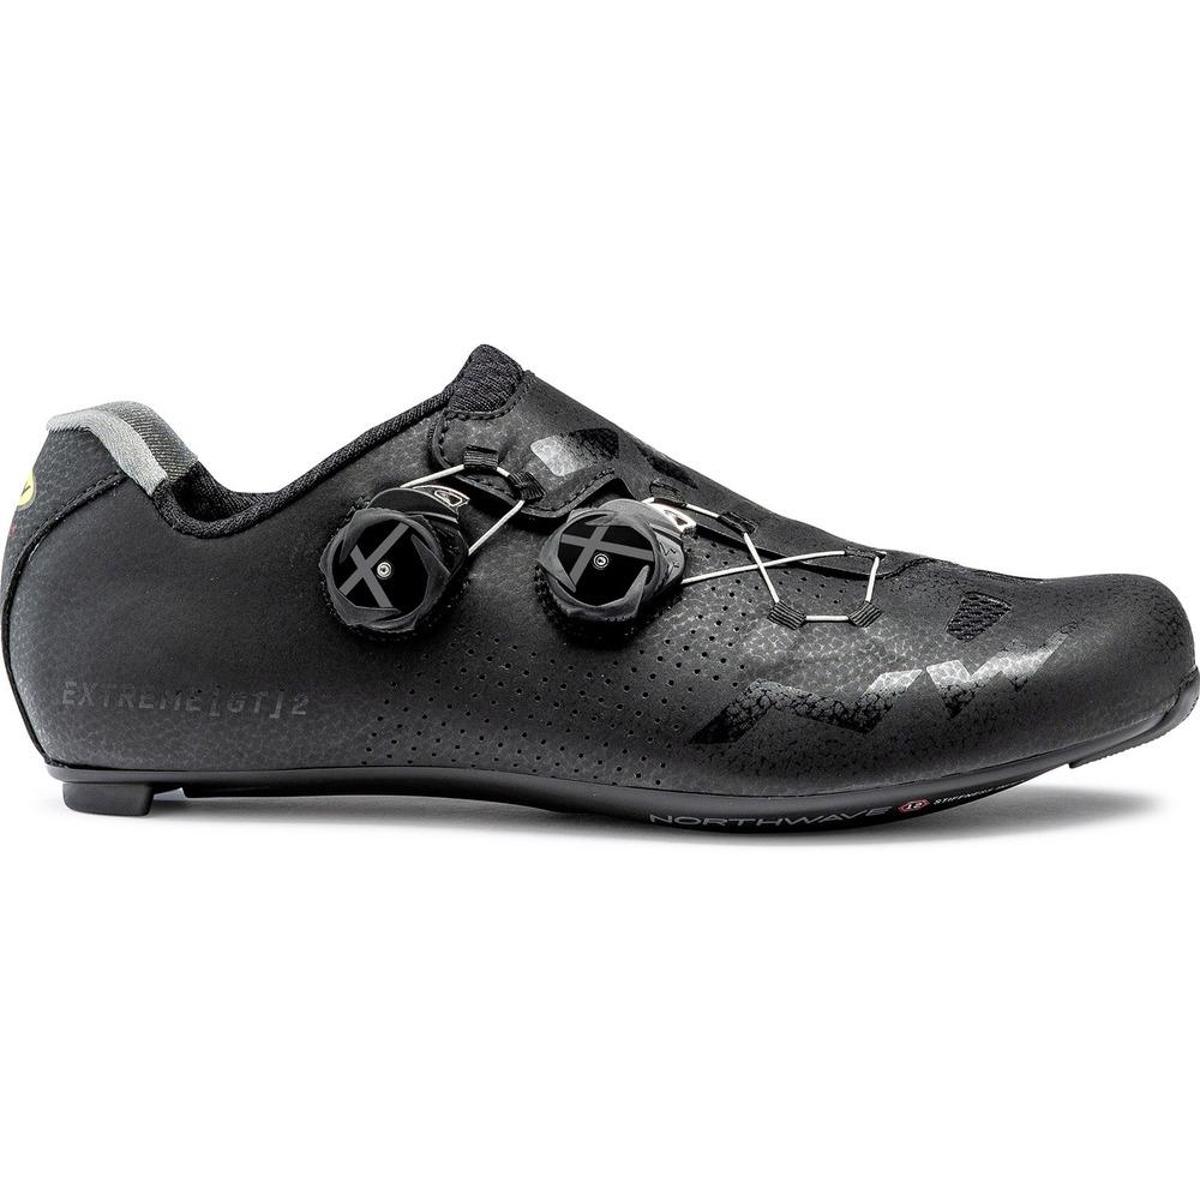 Northwave Extreme GT2 Road Cycling Shoes